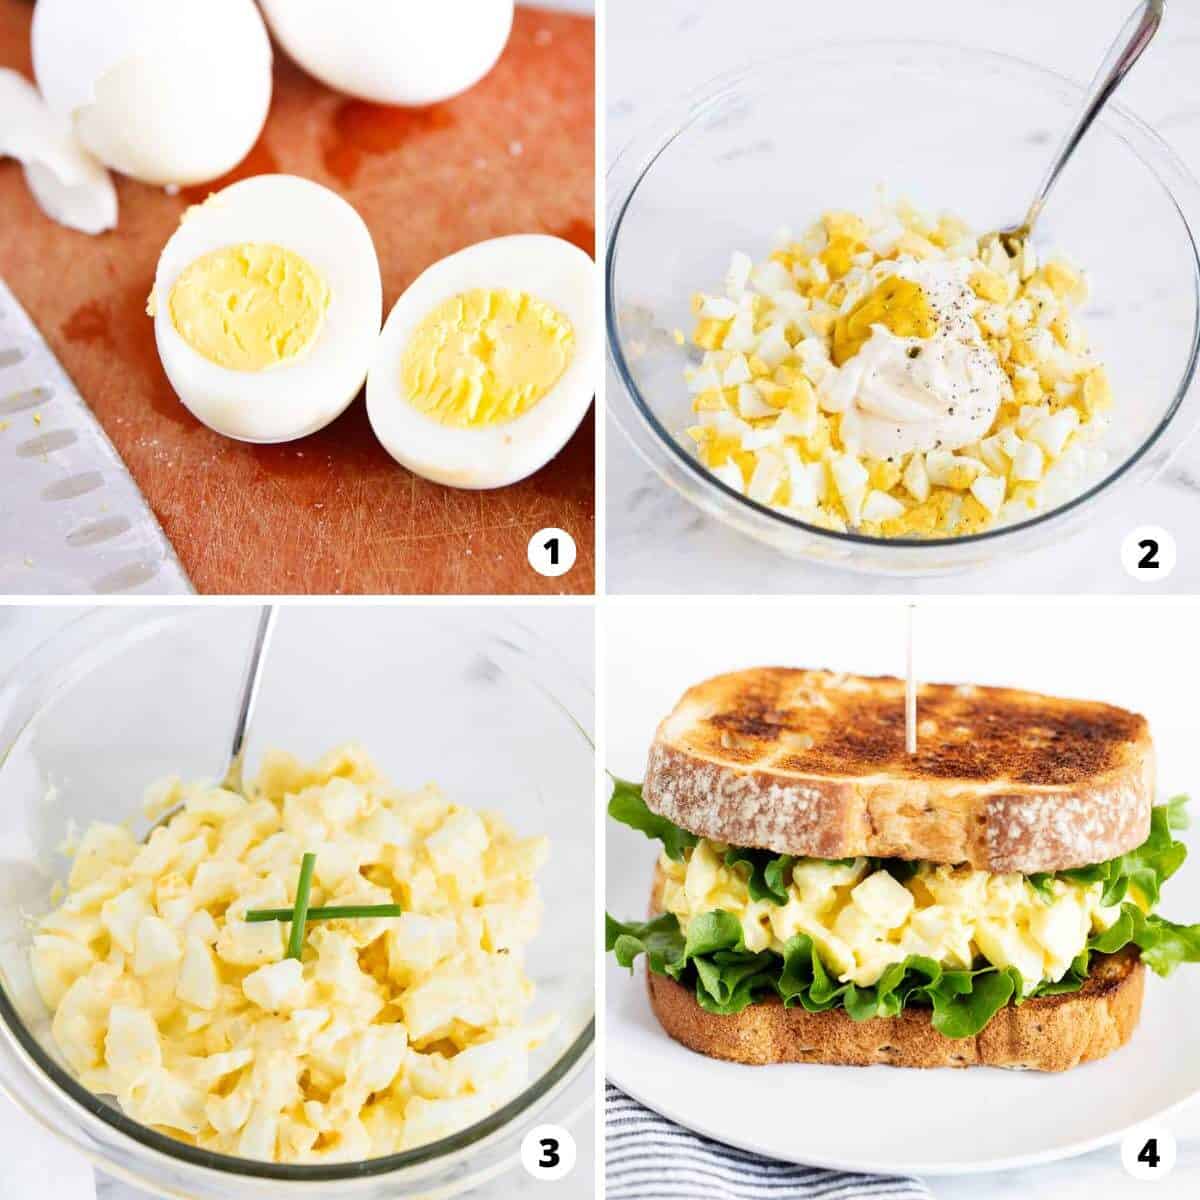 Showing how to make an egg salad sandwich in a 4 step collage. 